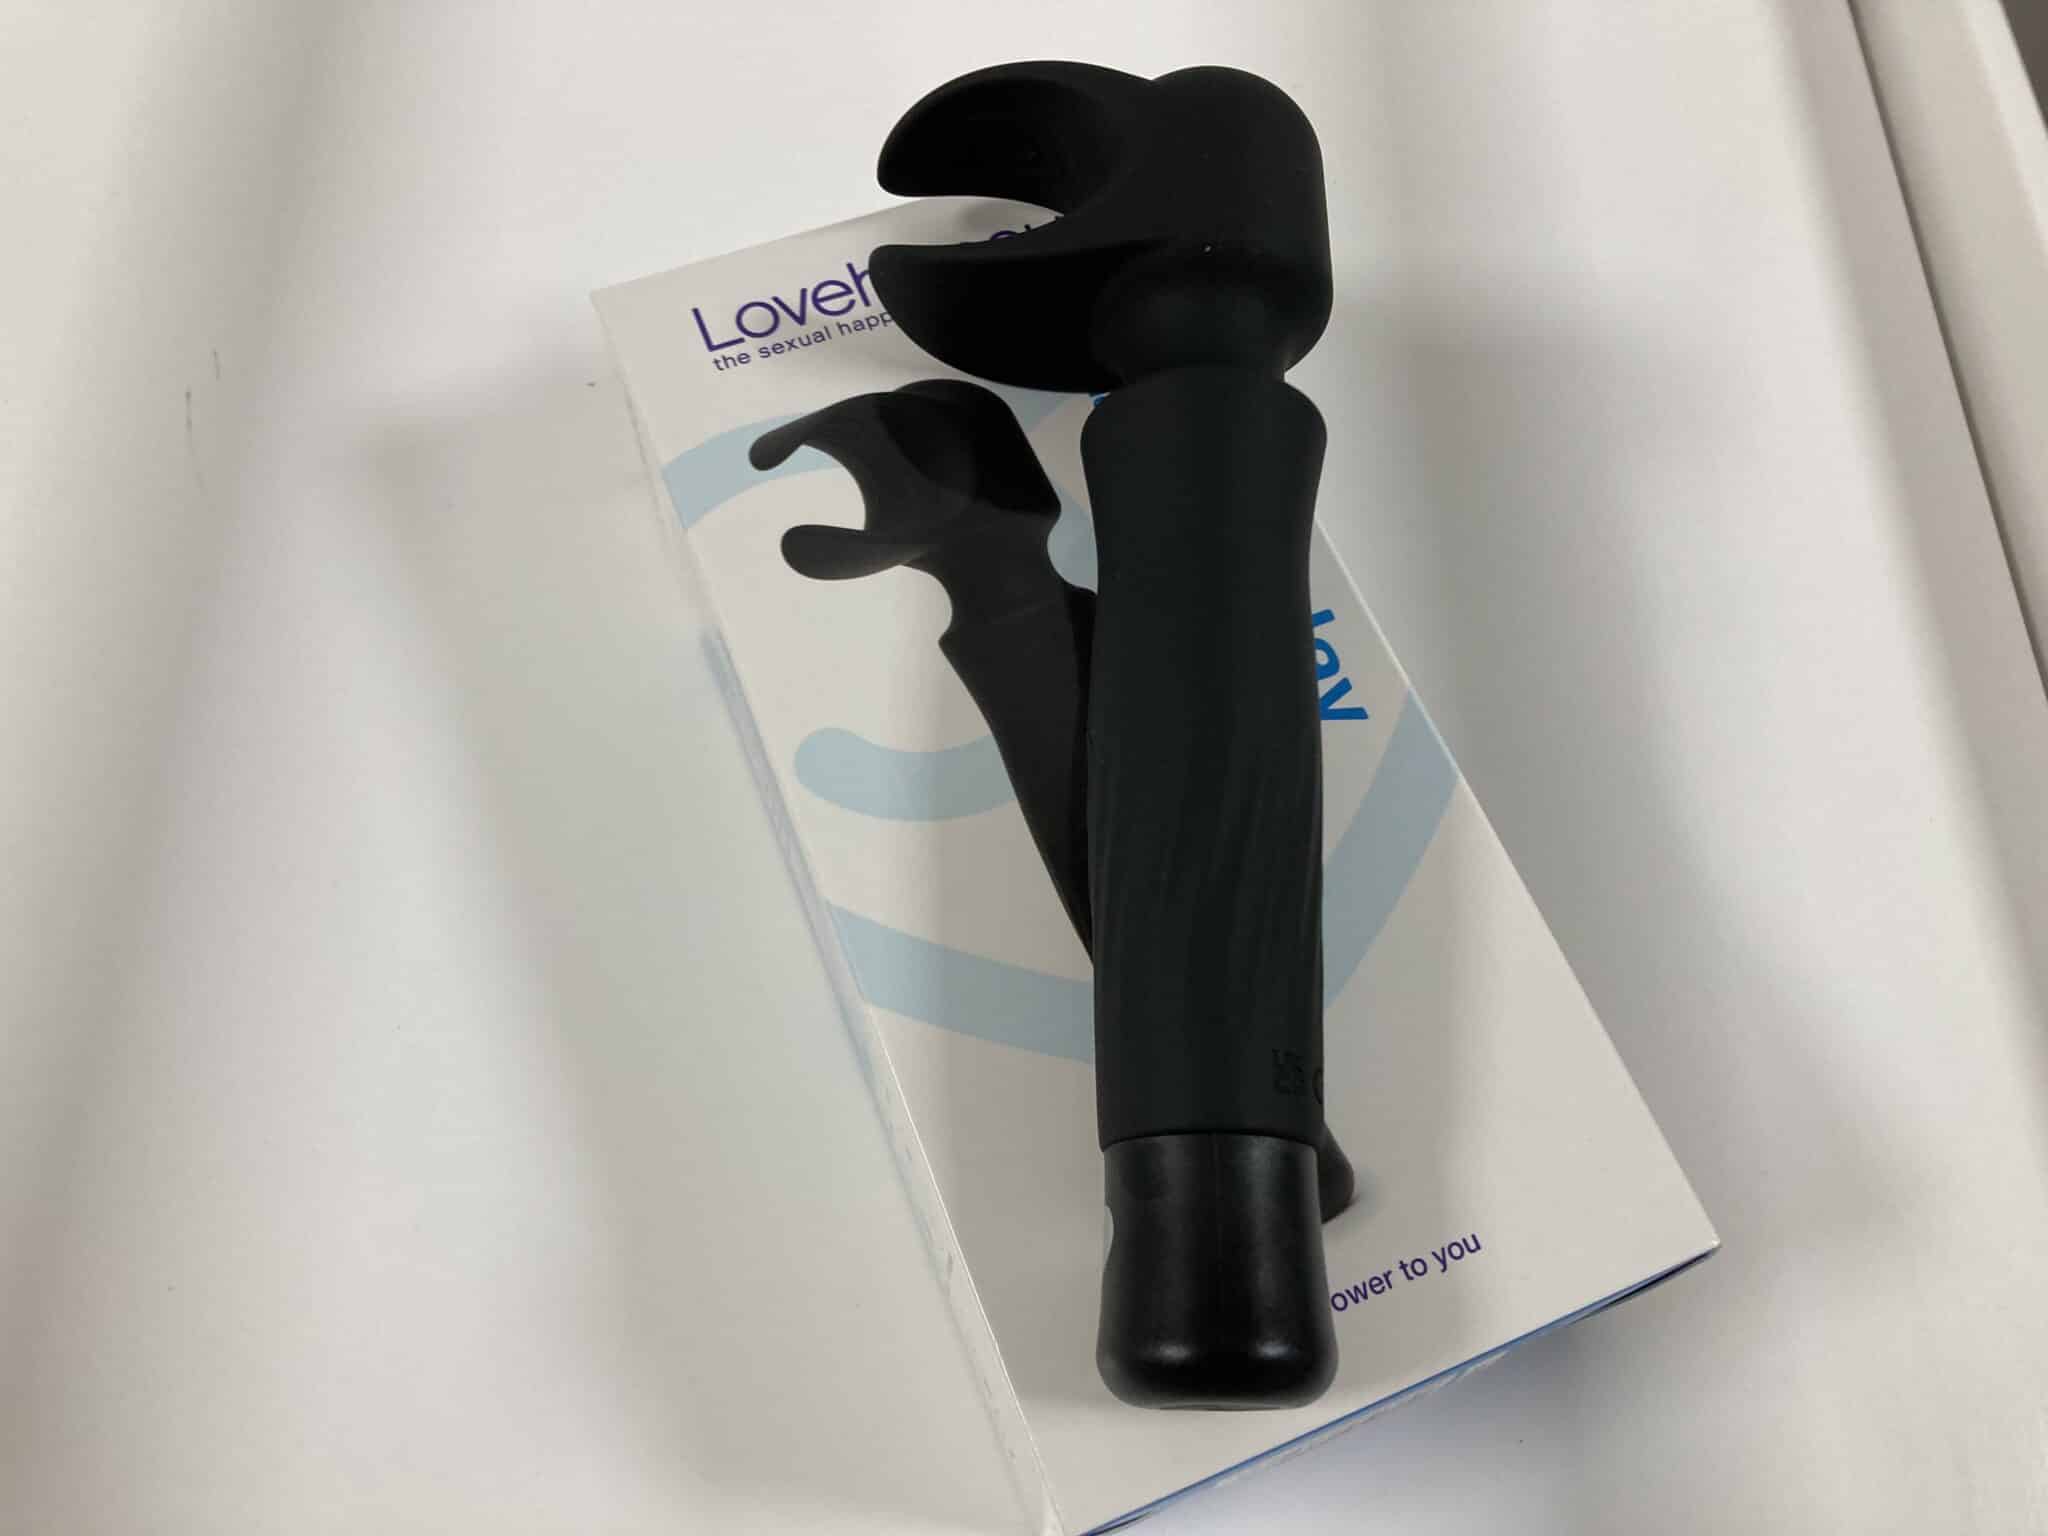 Lovehoney Power Play Male Massage Wand Exploring the Materials and Care of the Lovehoney Power Play Male Massage Wand